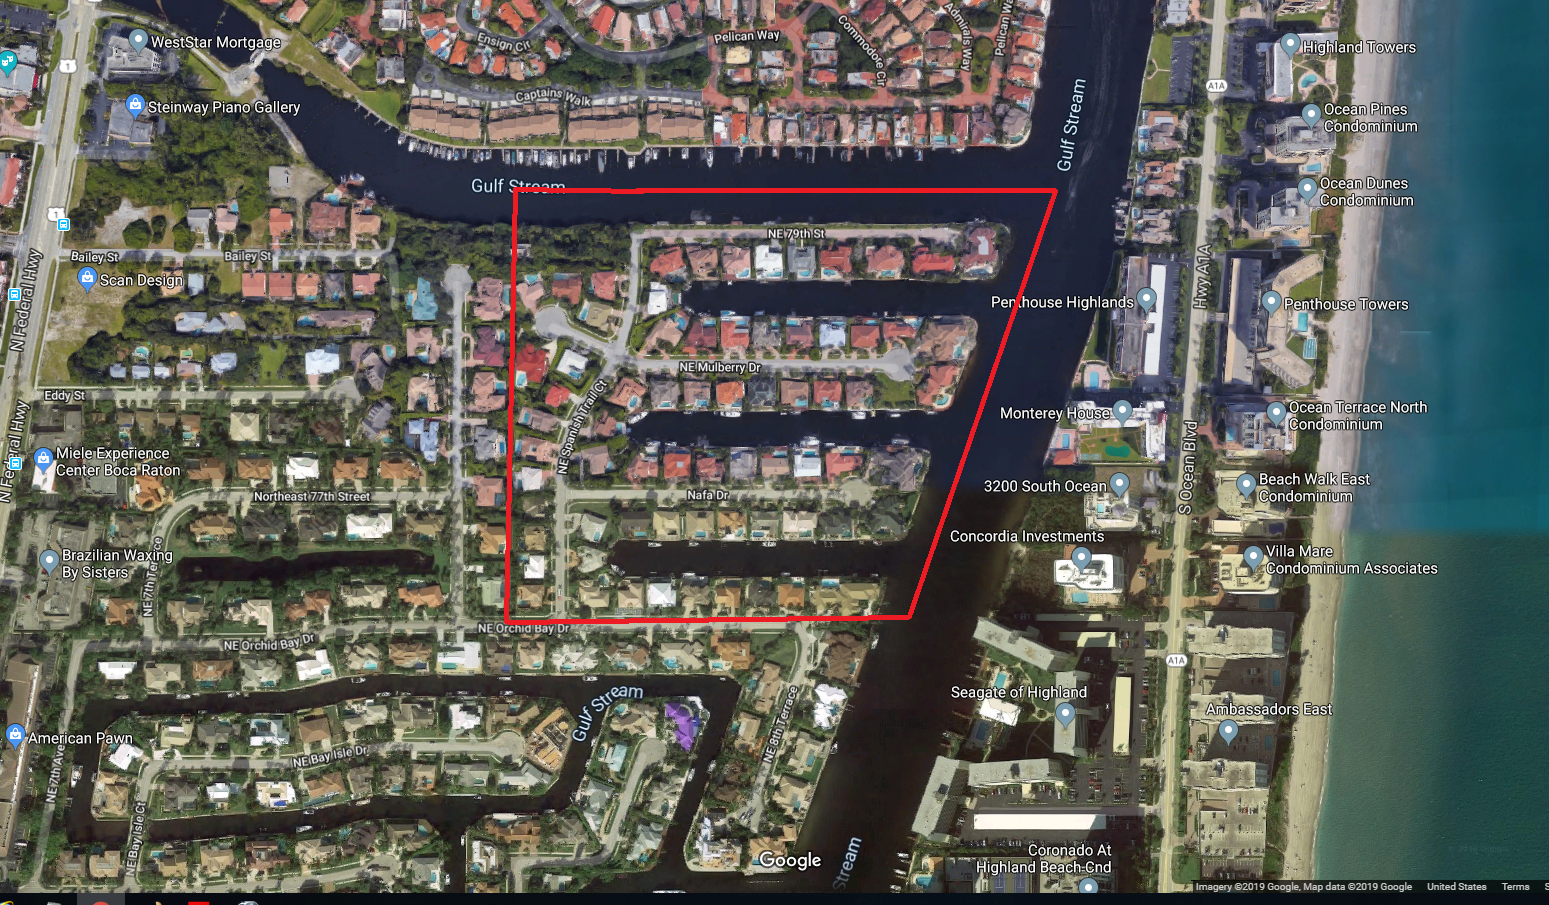 Boca Raton Walker's Cay luxury homes for sale aerial for Jean-Luc Andriot blog 032919.png